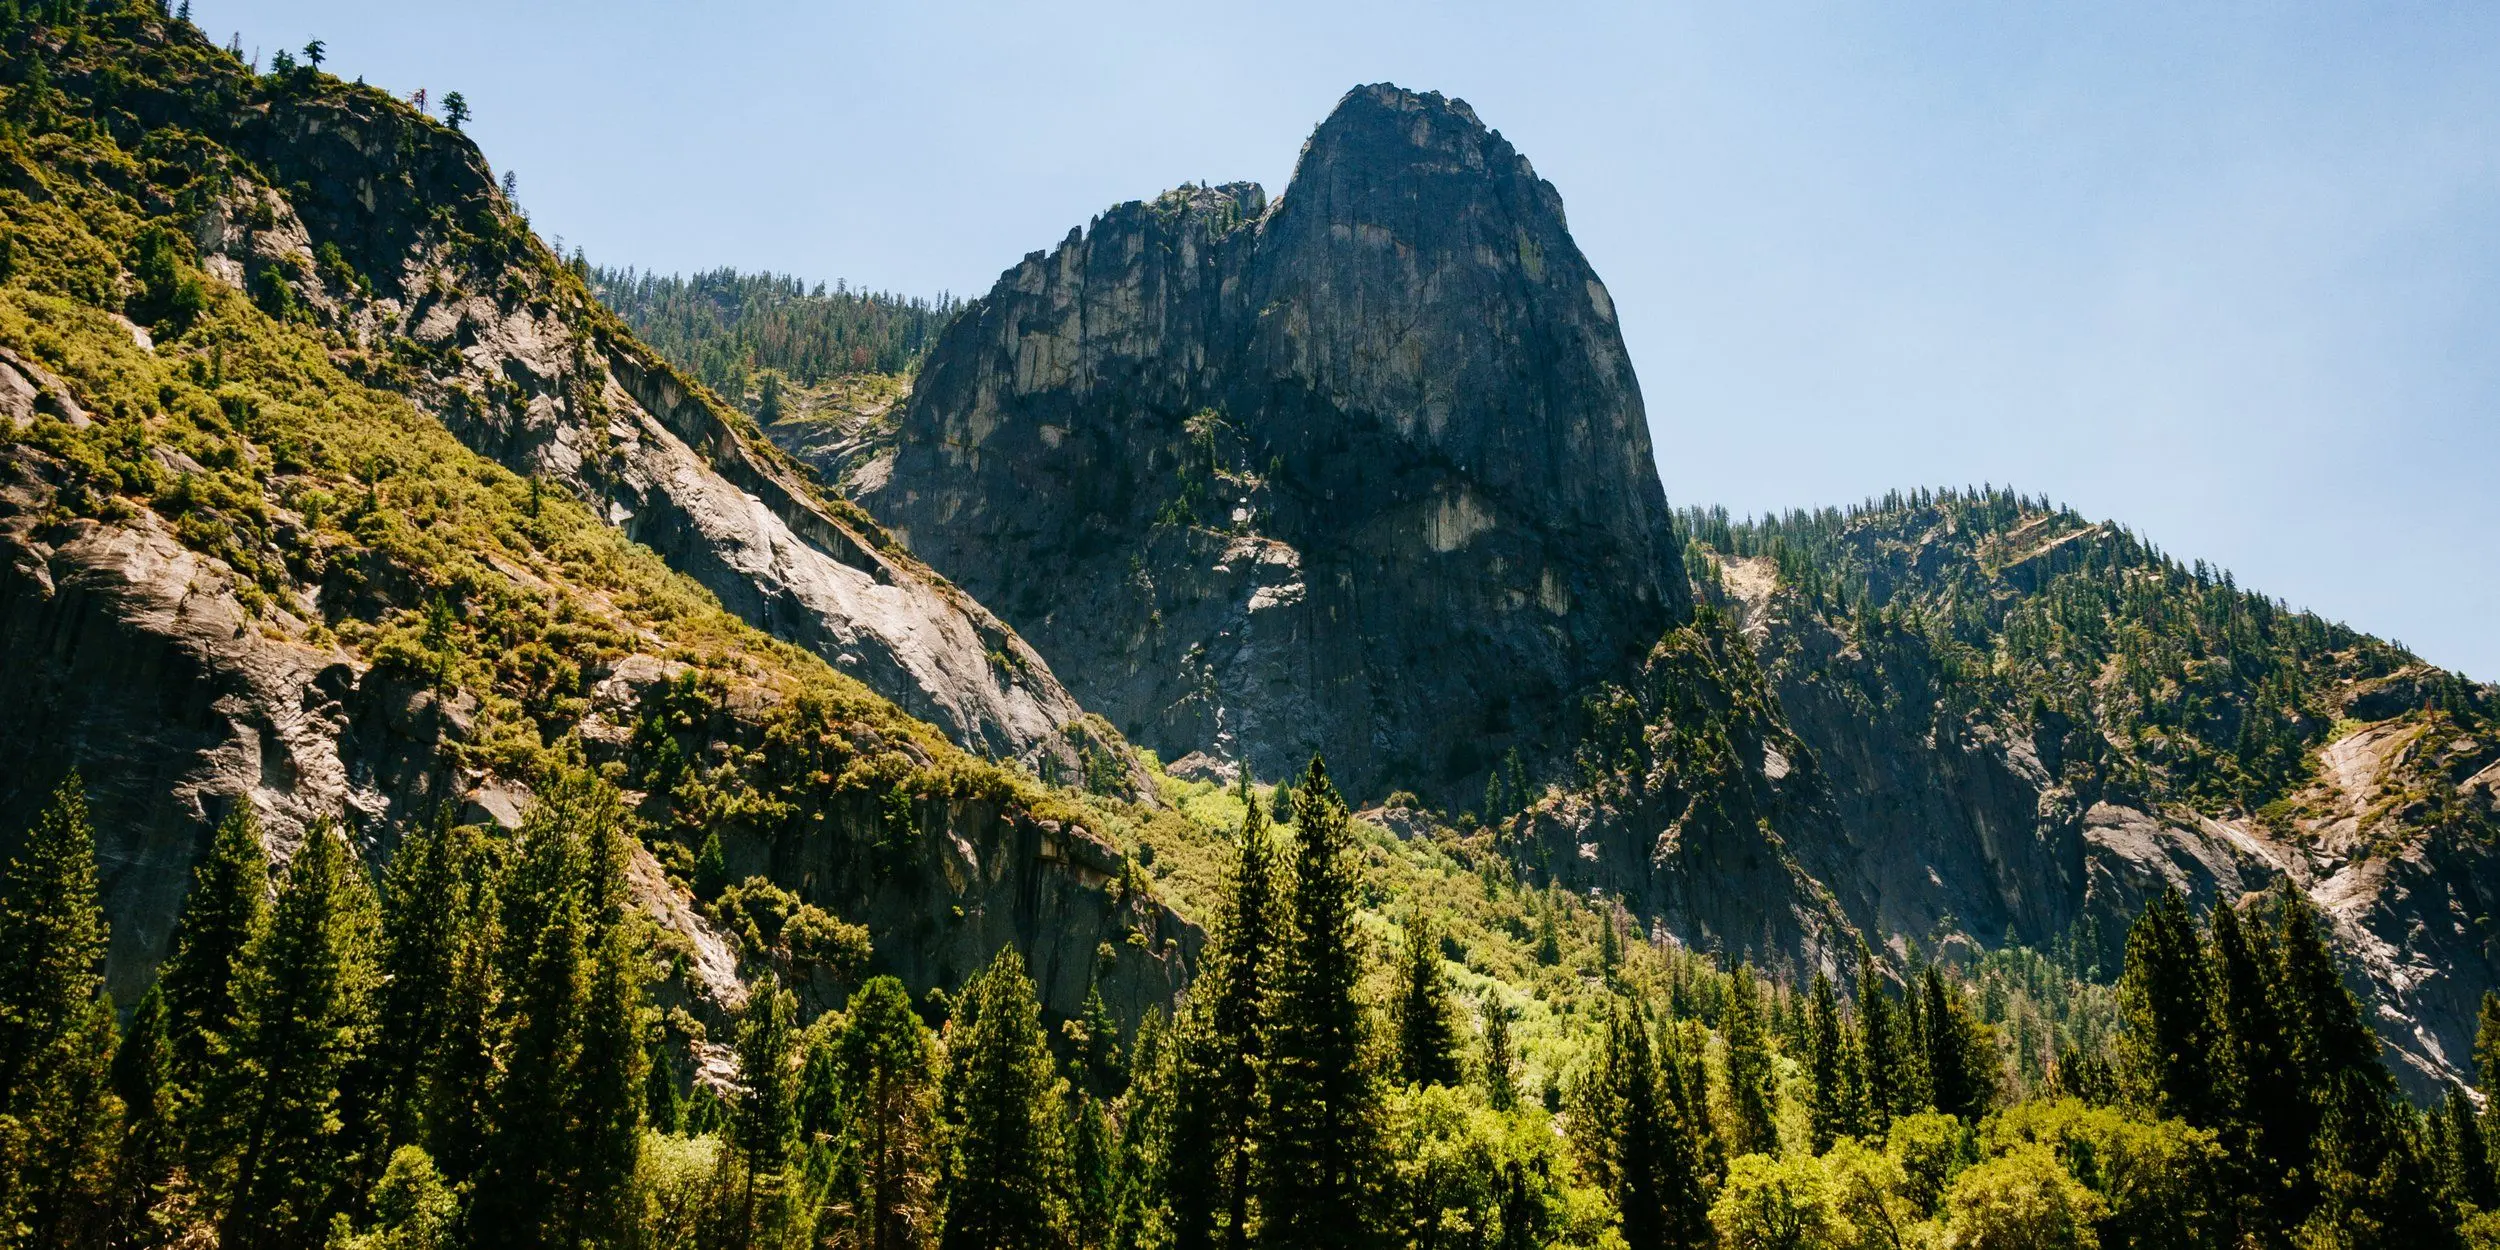 Yosemite's Sentinel Rock stands majestically over lush green trees on a bright summer day.